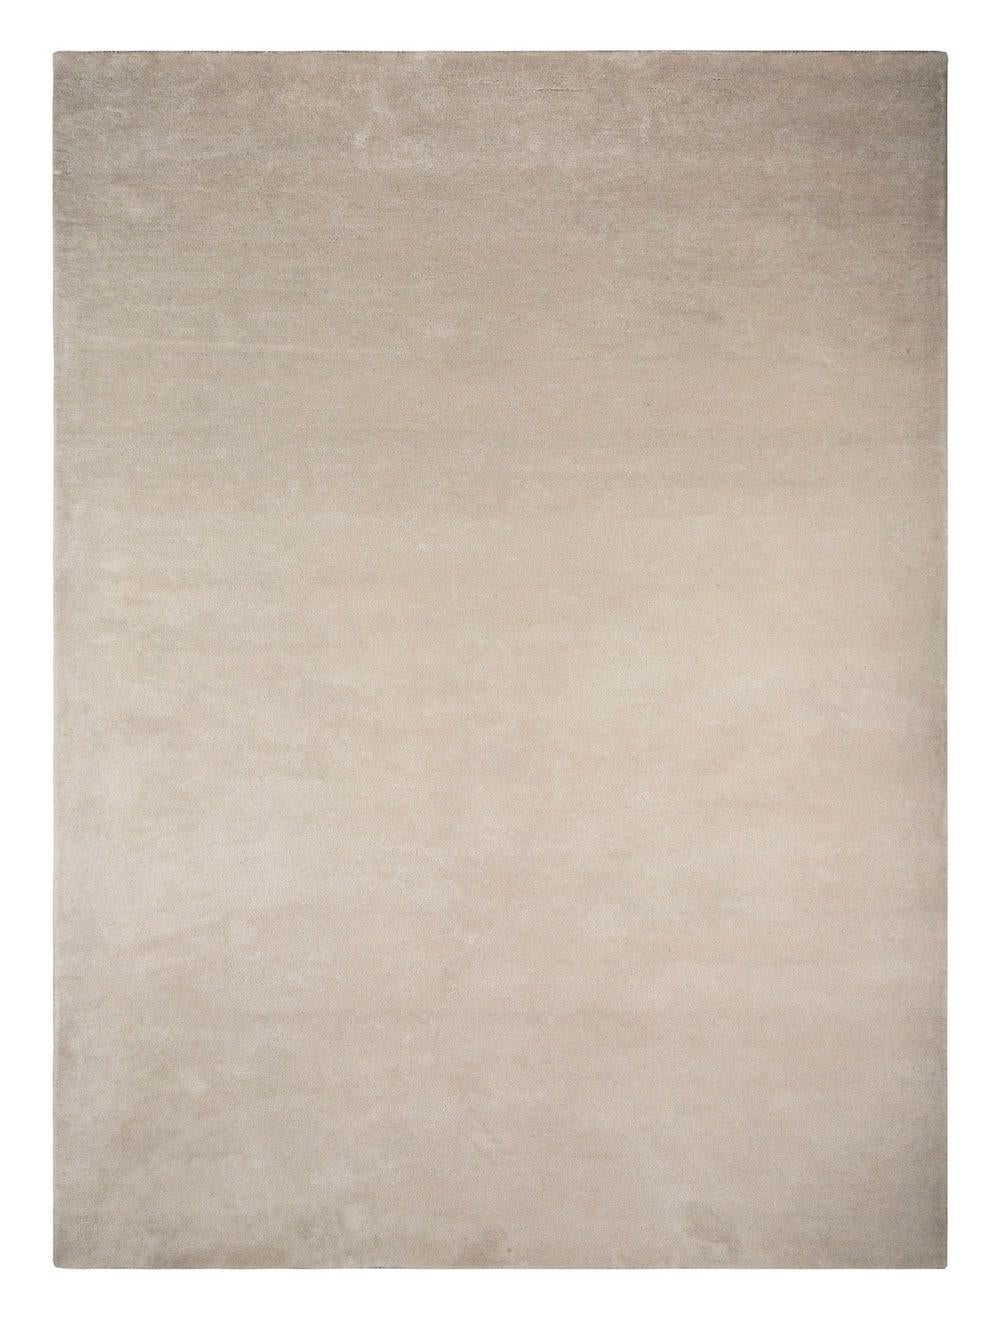 Cream RePeat Carpet by Massimo Copenhagen.
Handtufted
Materials: 100% Recycled PET, Cotton.
Dimensions: W 250 x H 350 cm.
Available colors: Graphite, Cream, Beige, Pistachio, and Pastel Yellow. 
Other dimensions are available: 160x230 cm,